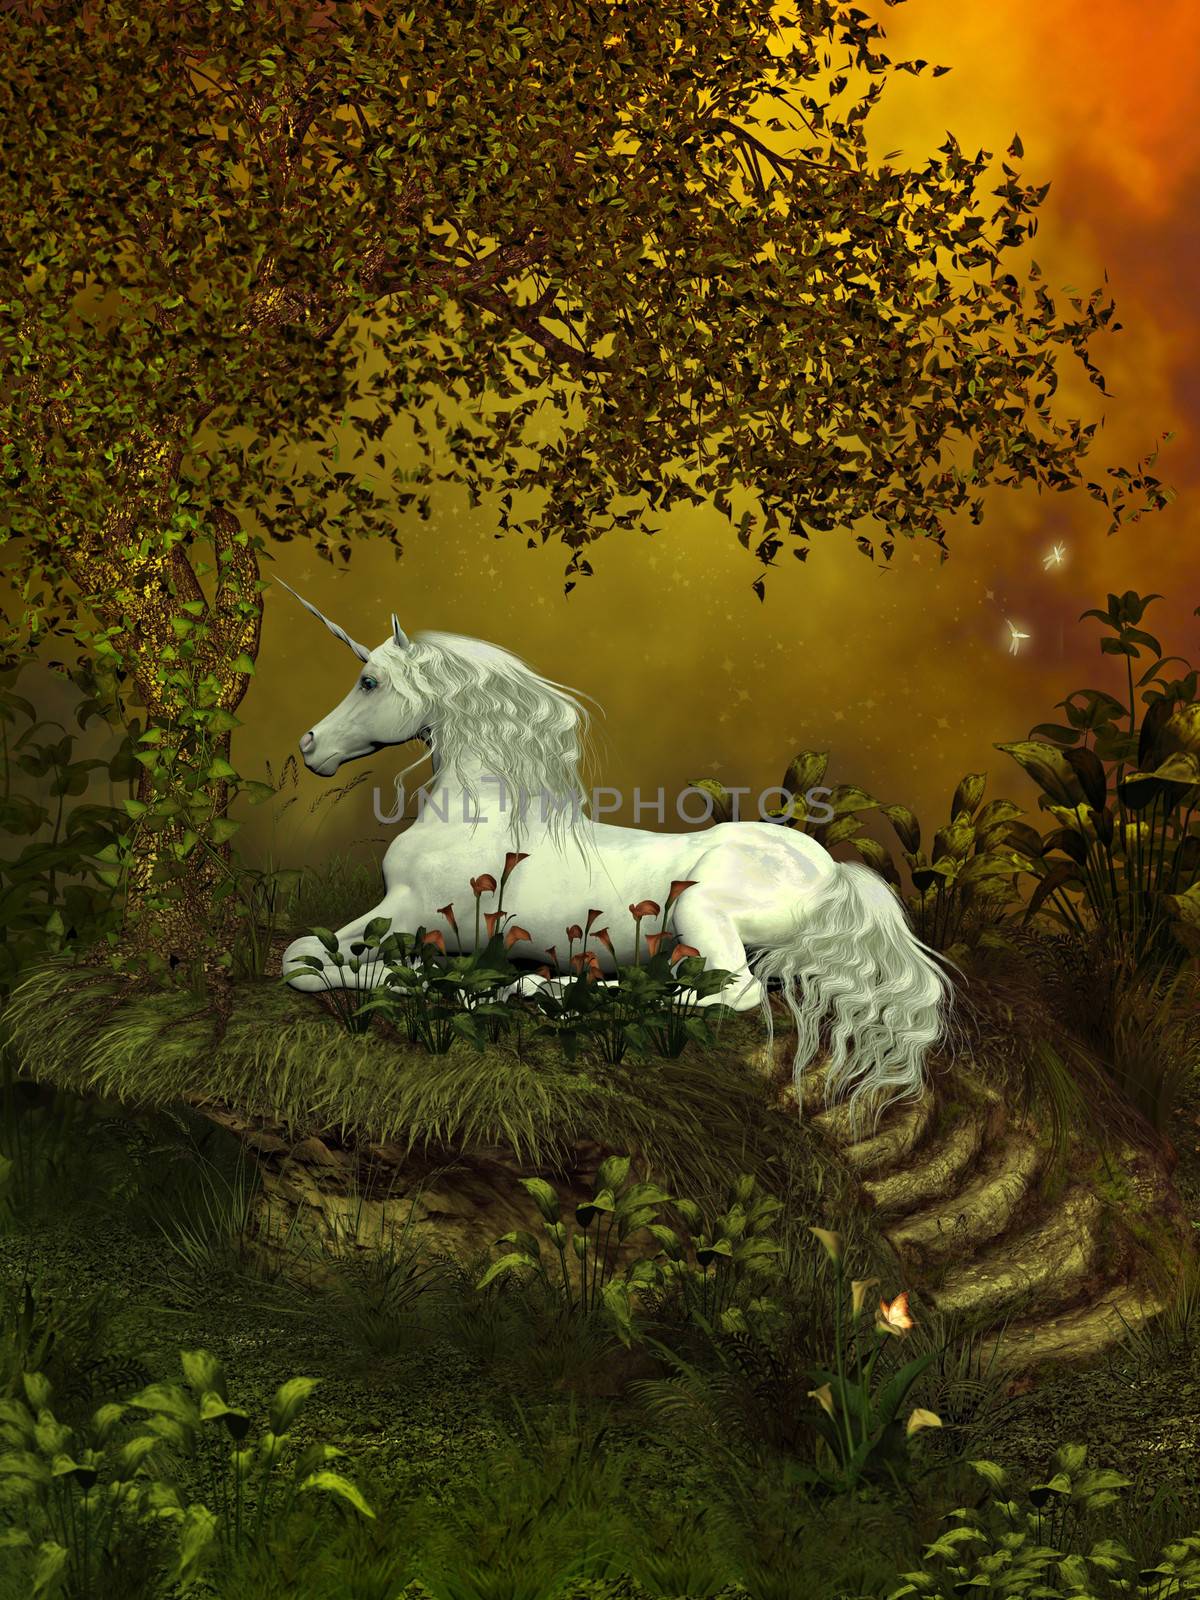 A beautiful white unicorn lays underneath a forest tree to rest among the flowers.